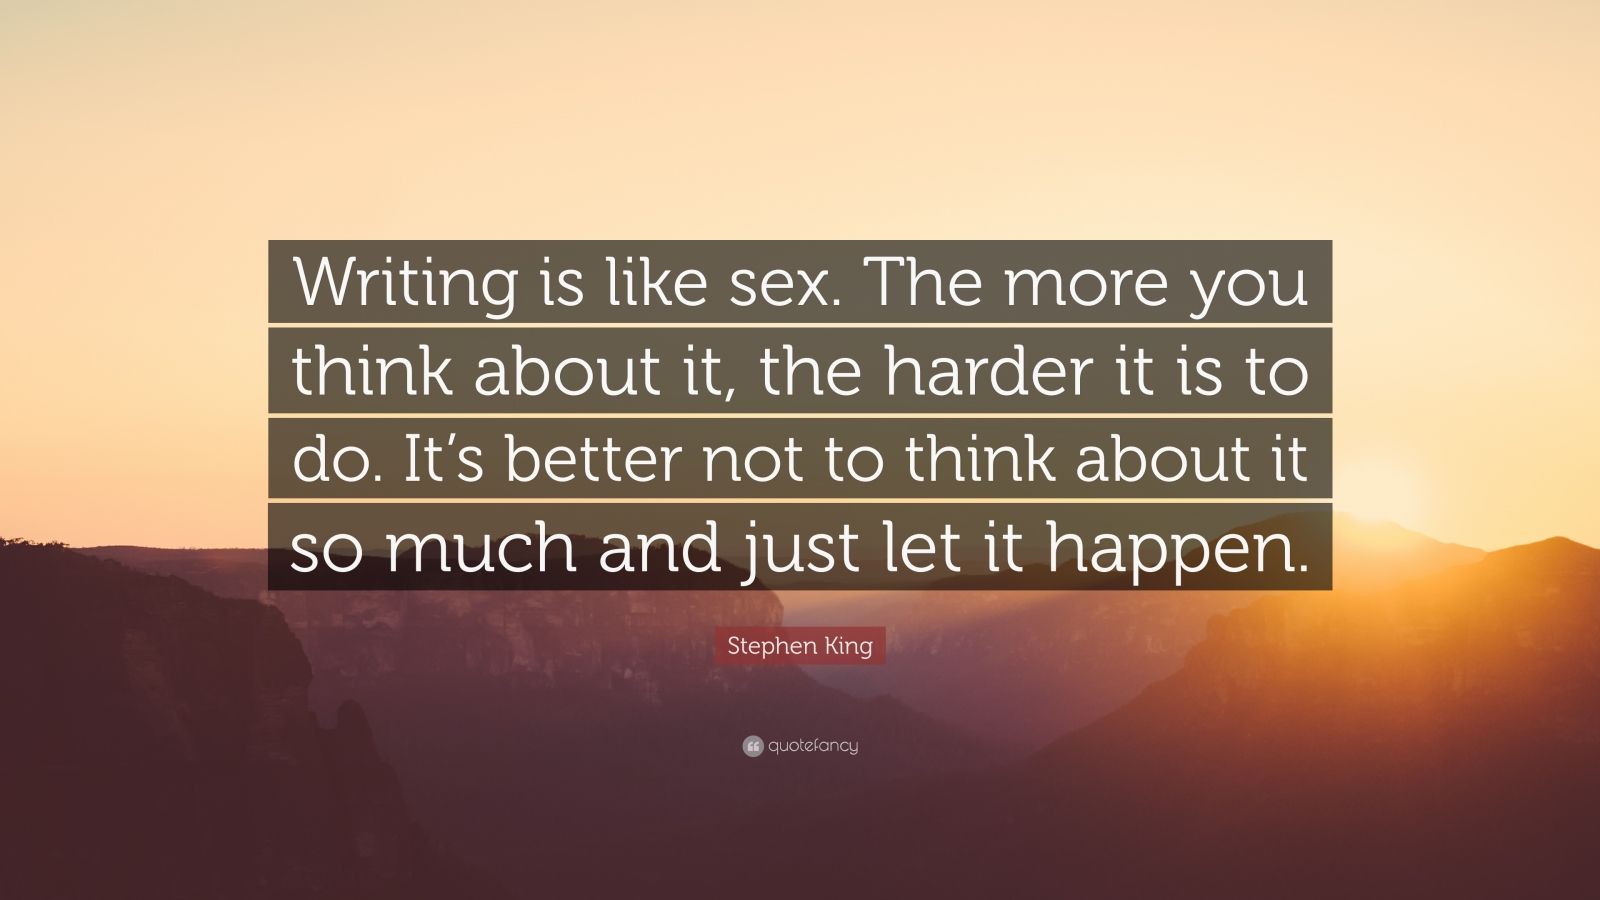 Stephen King Quote “writing Is Like Sex The More You